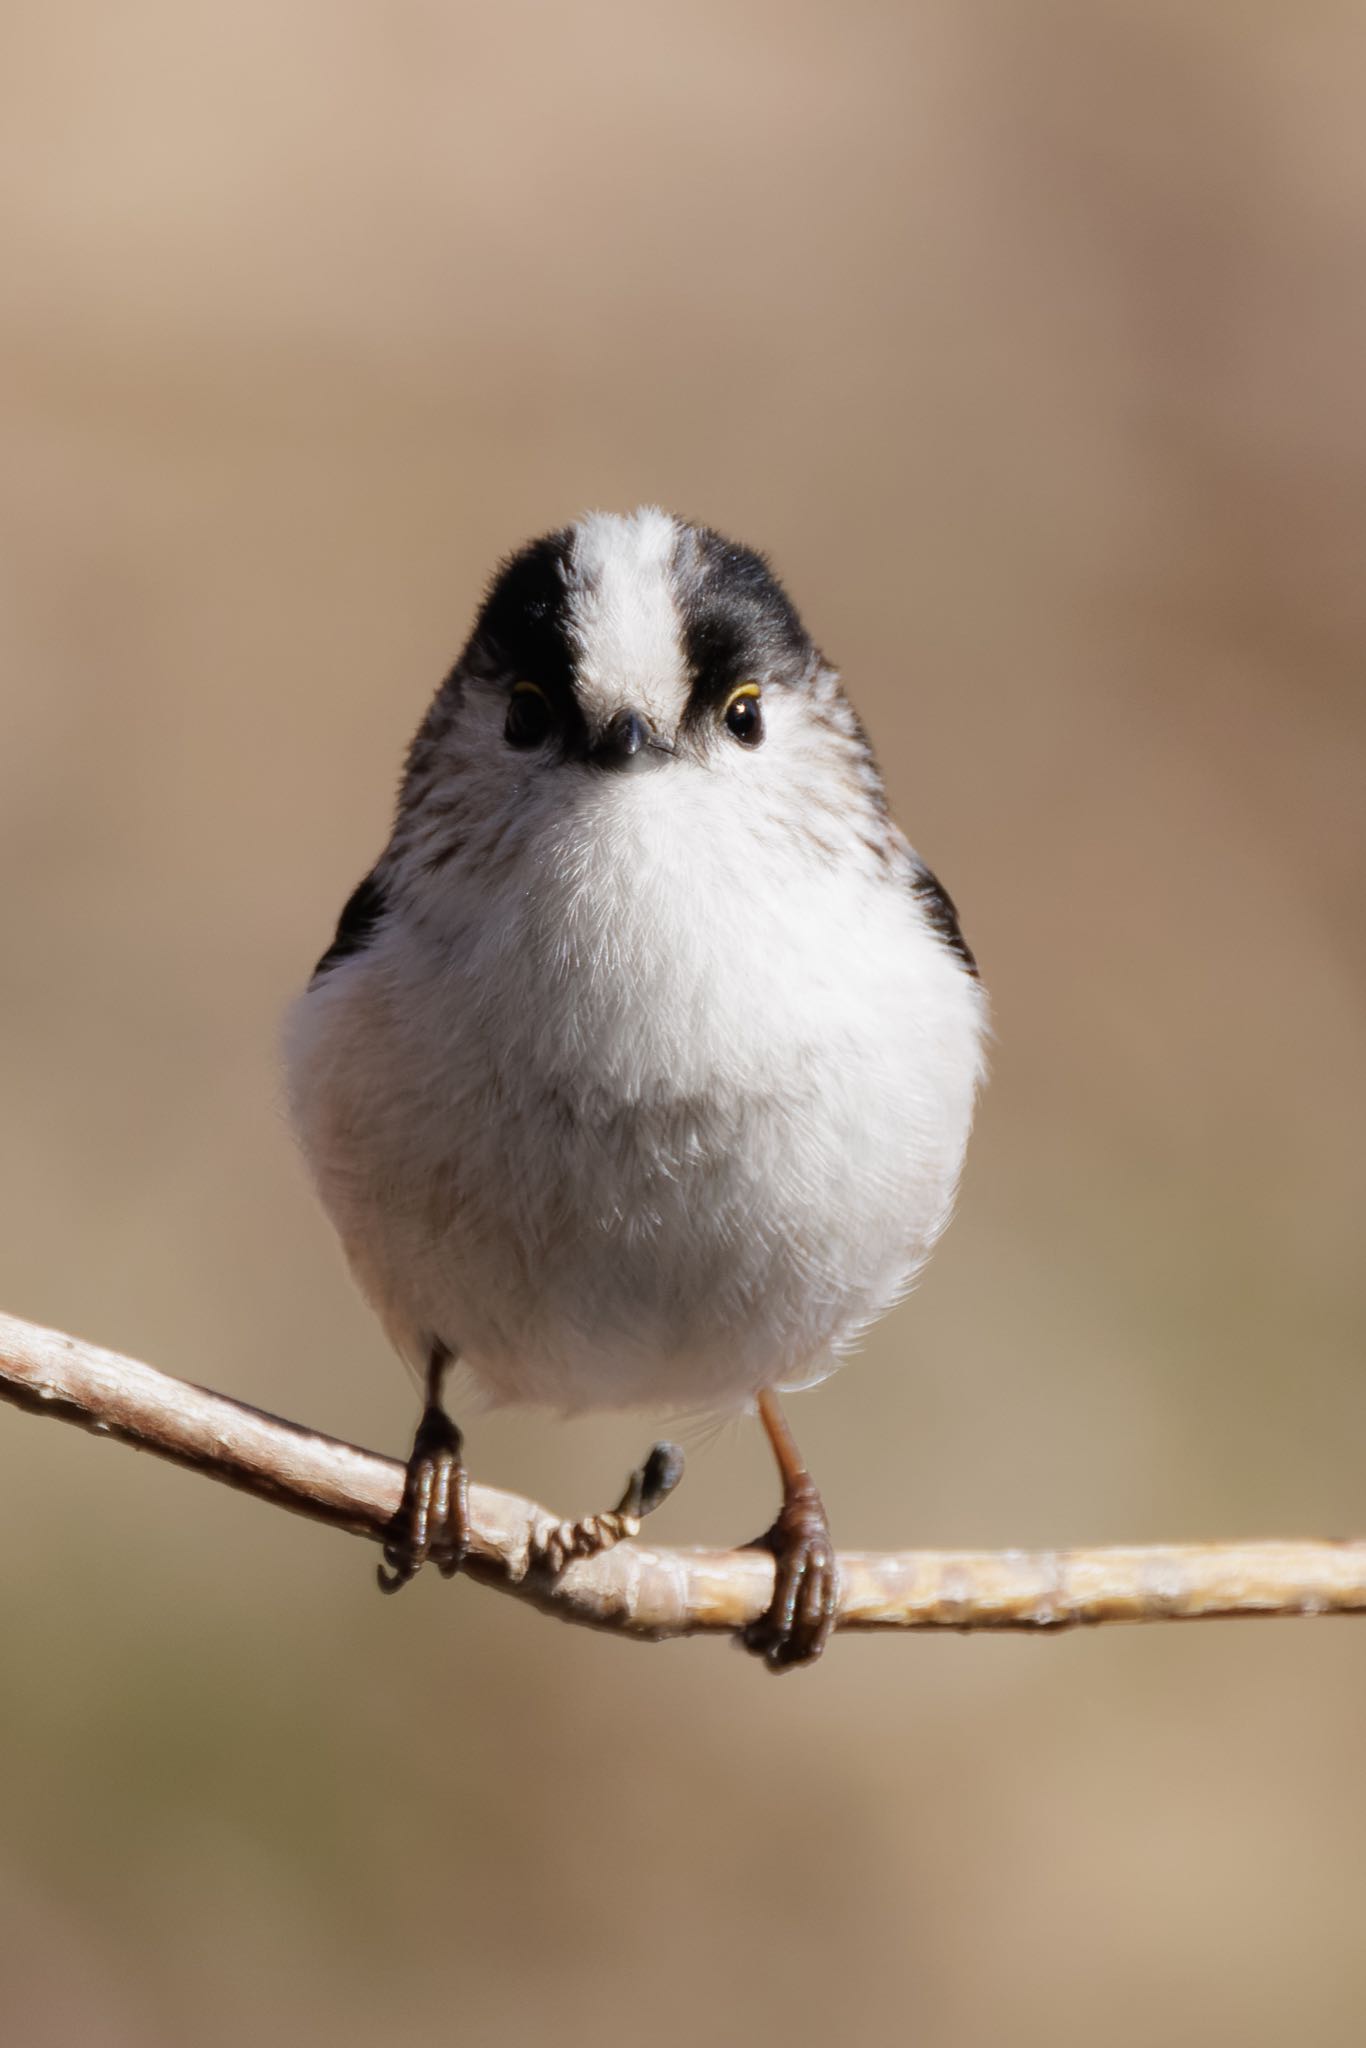 Photo of Long-tailed Tit at 木曽川河跡湖公園 by アカウント5104